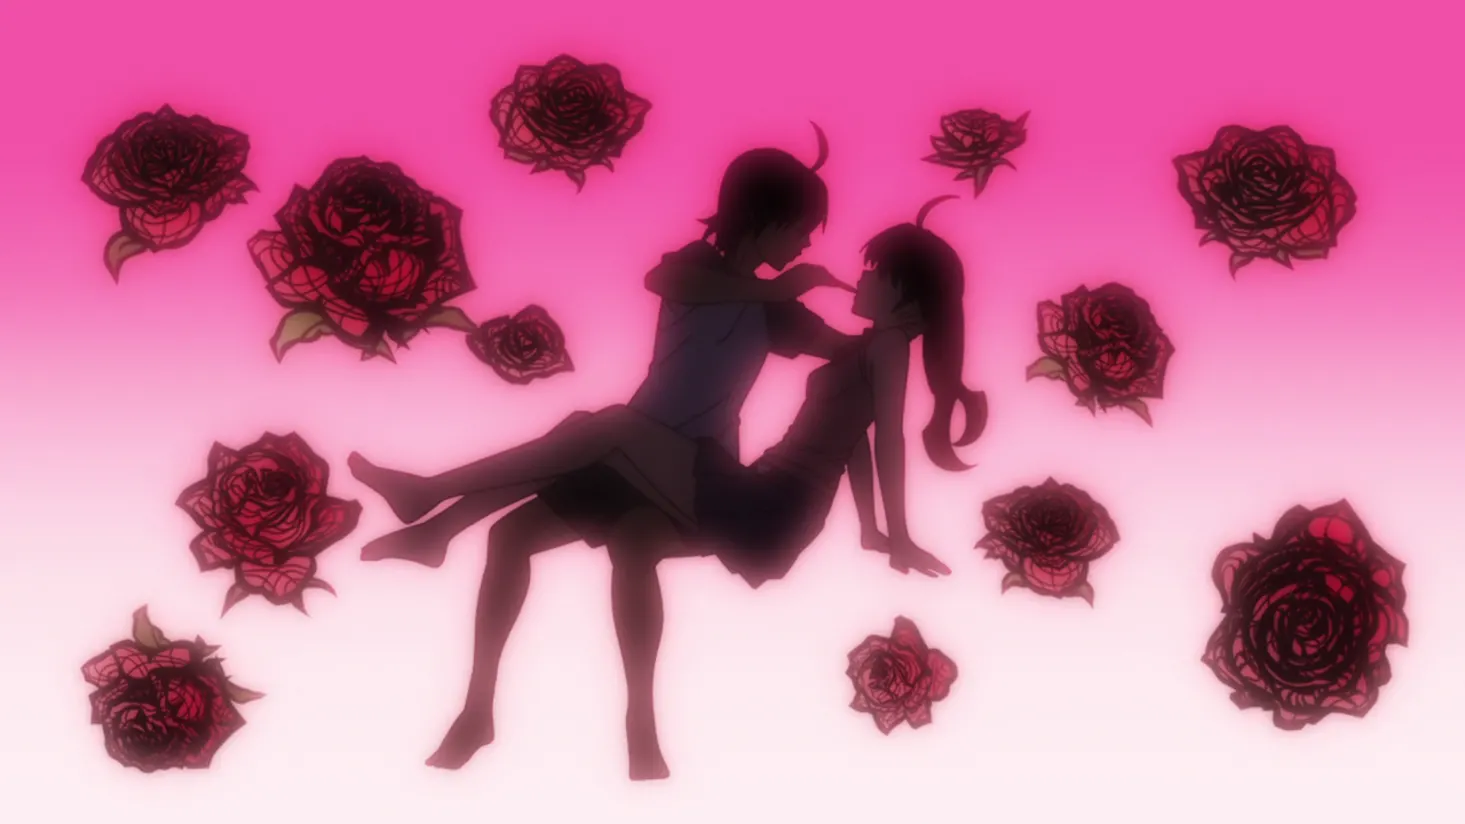 This is framed romantically, yes? Please god tell me this scene is meant to be a parody.